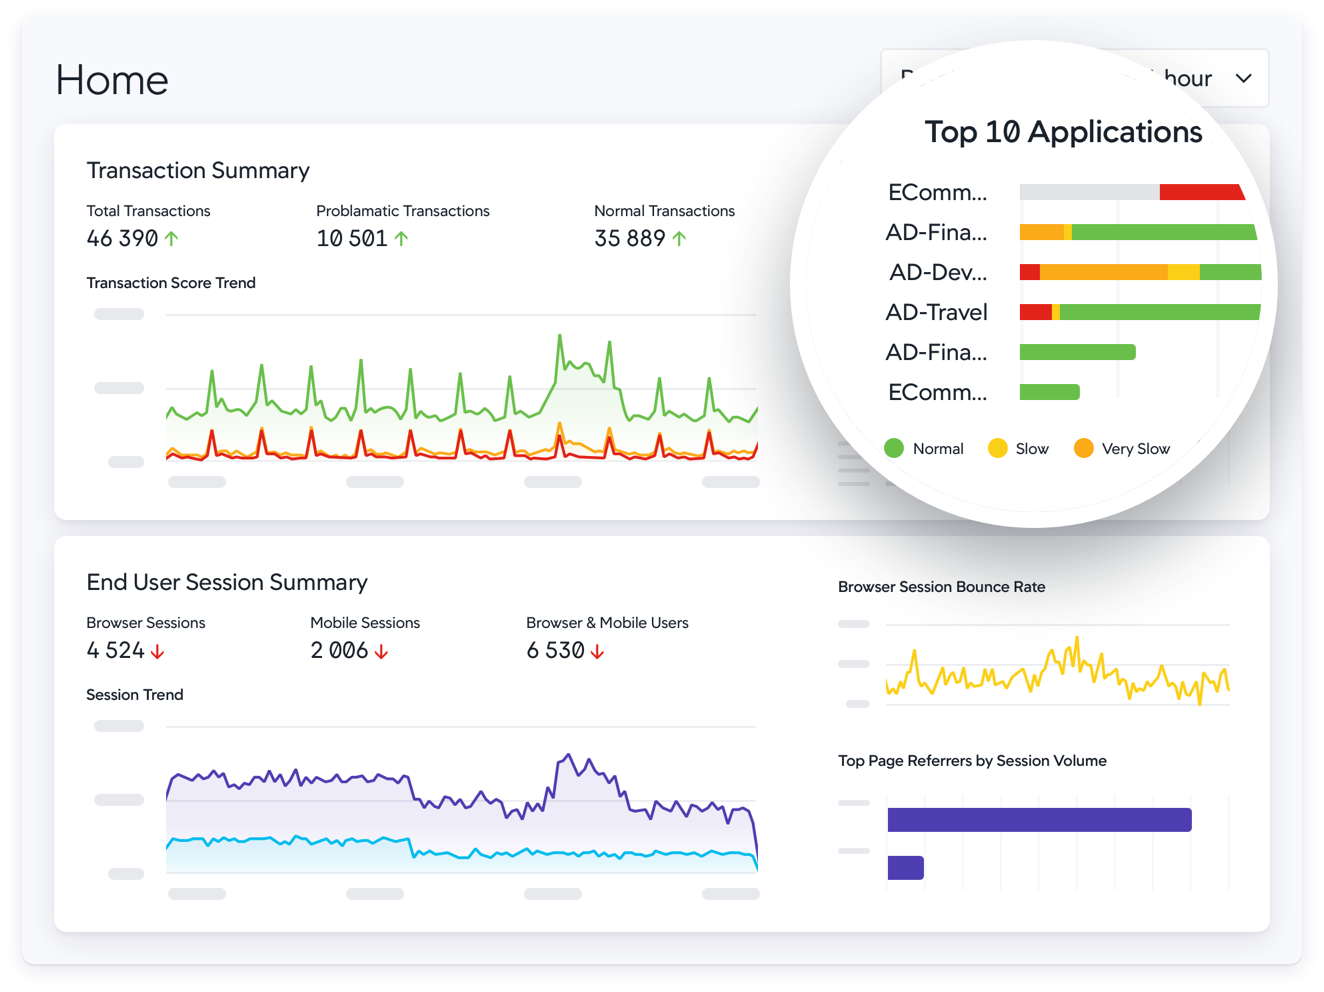 Correlate business KPIs and application performance data